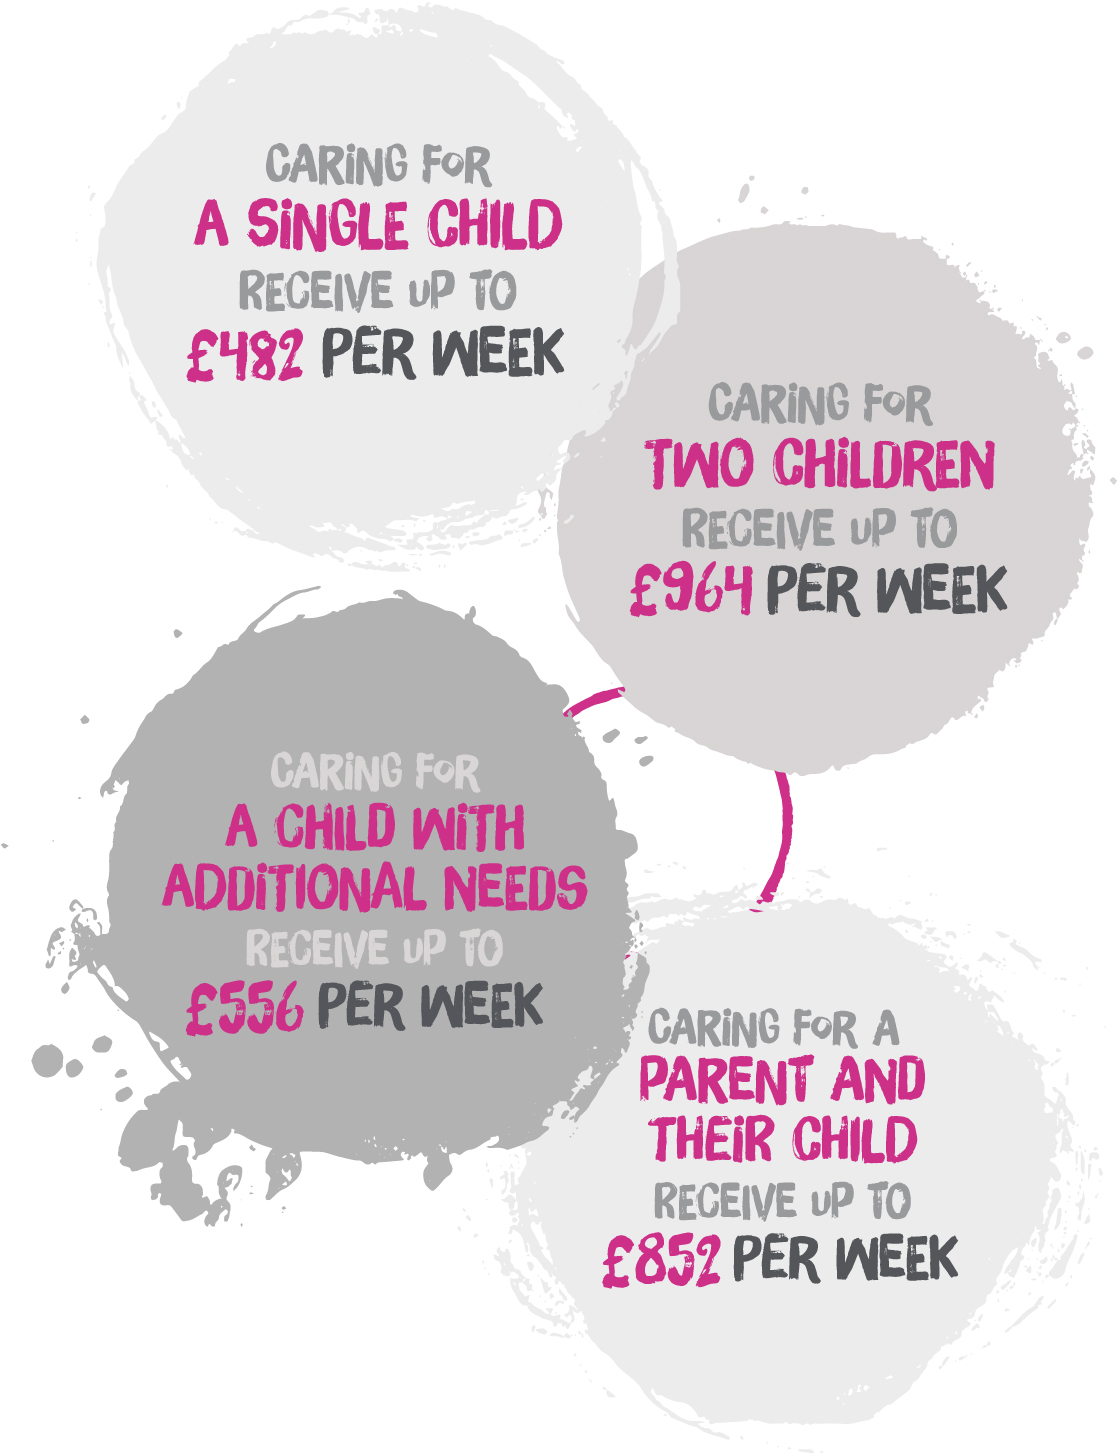 These are examples of our Enfield fostering allowances